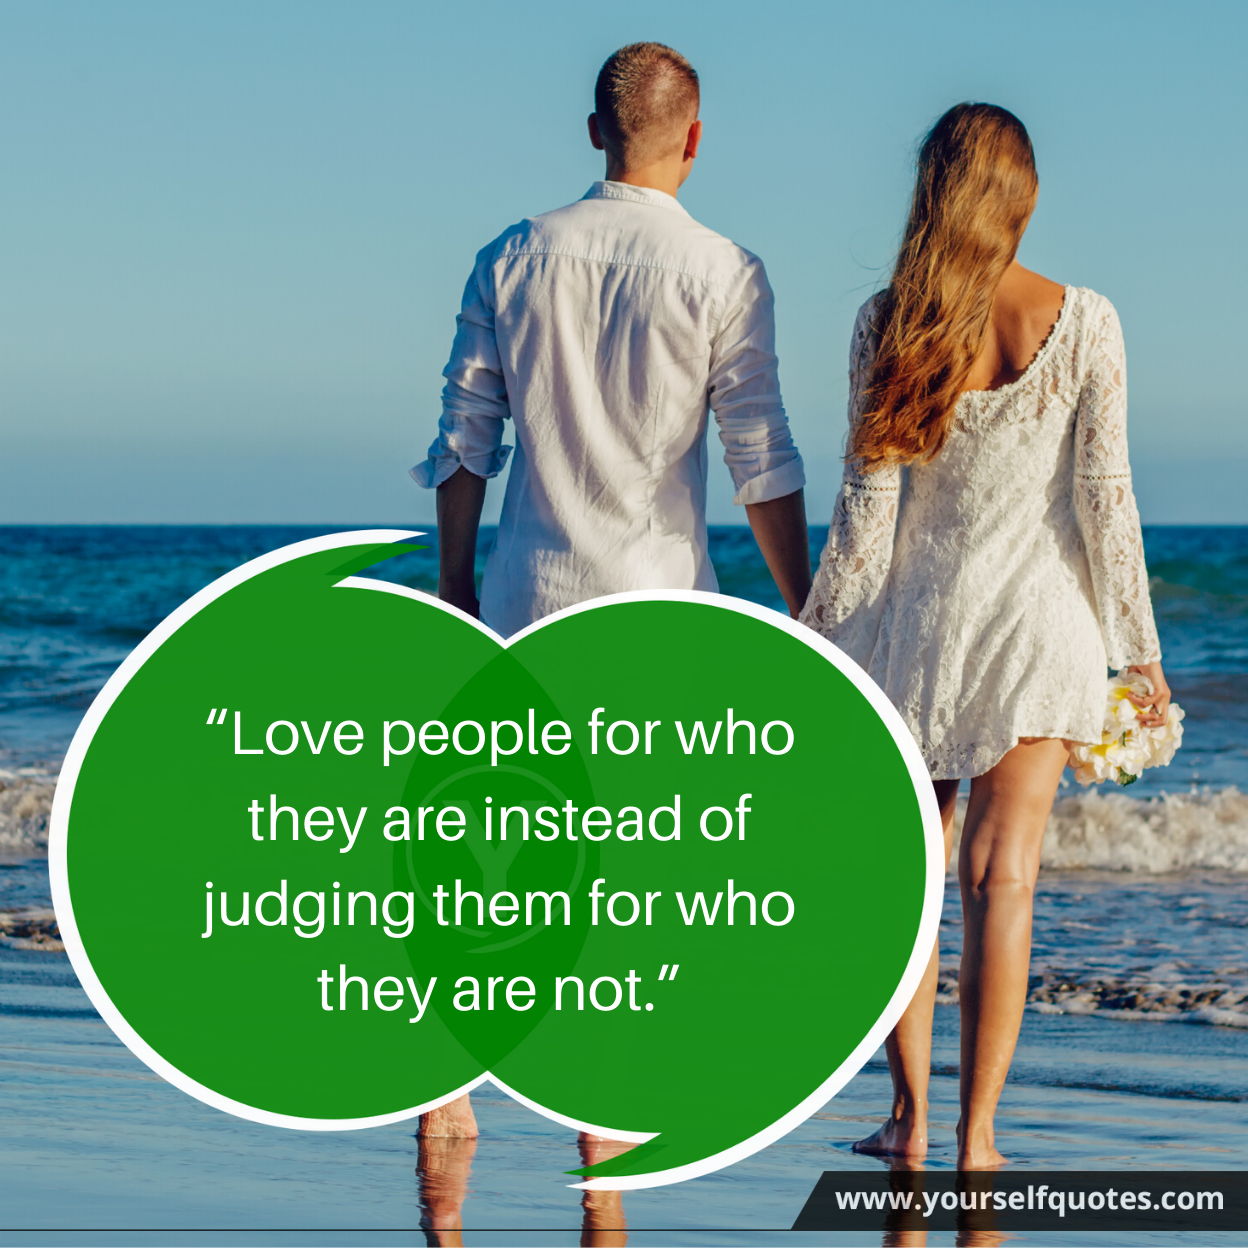 Best Quotes on Love